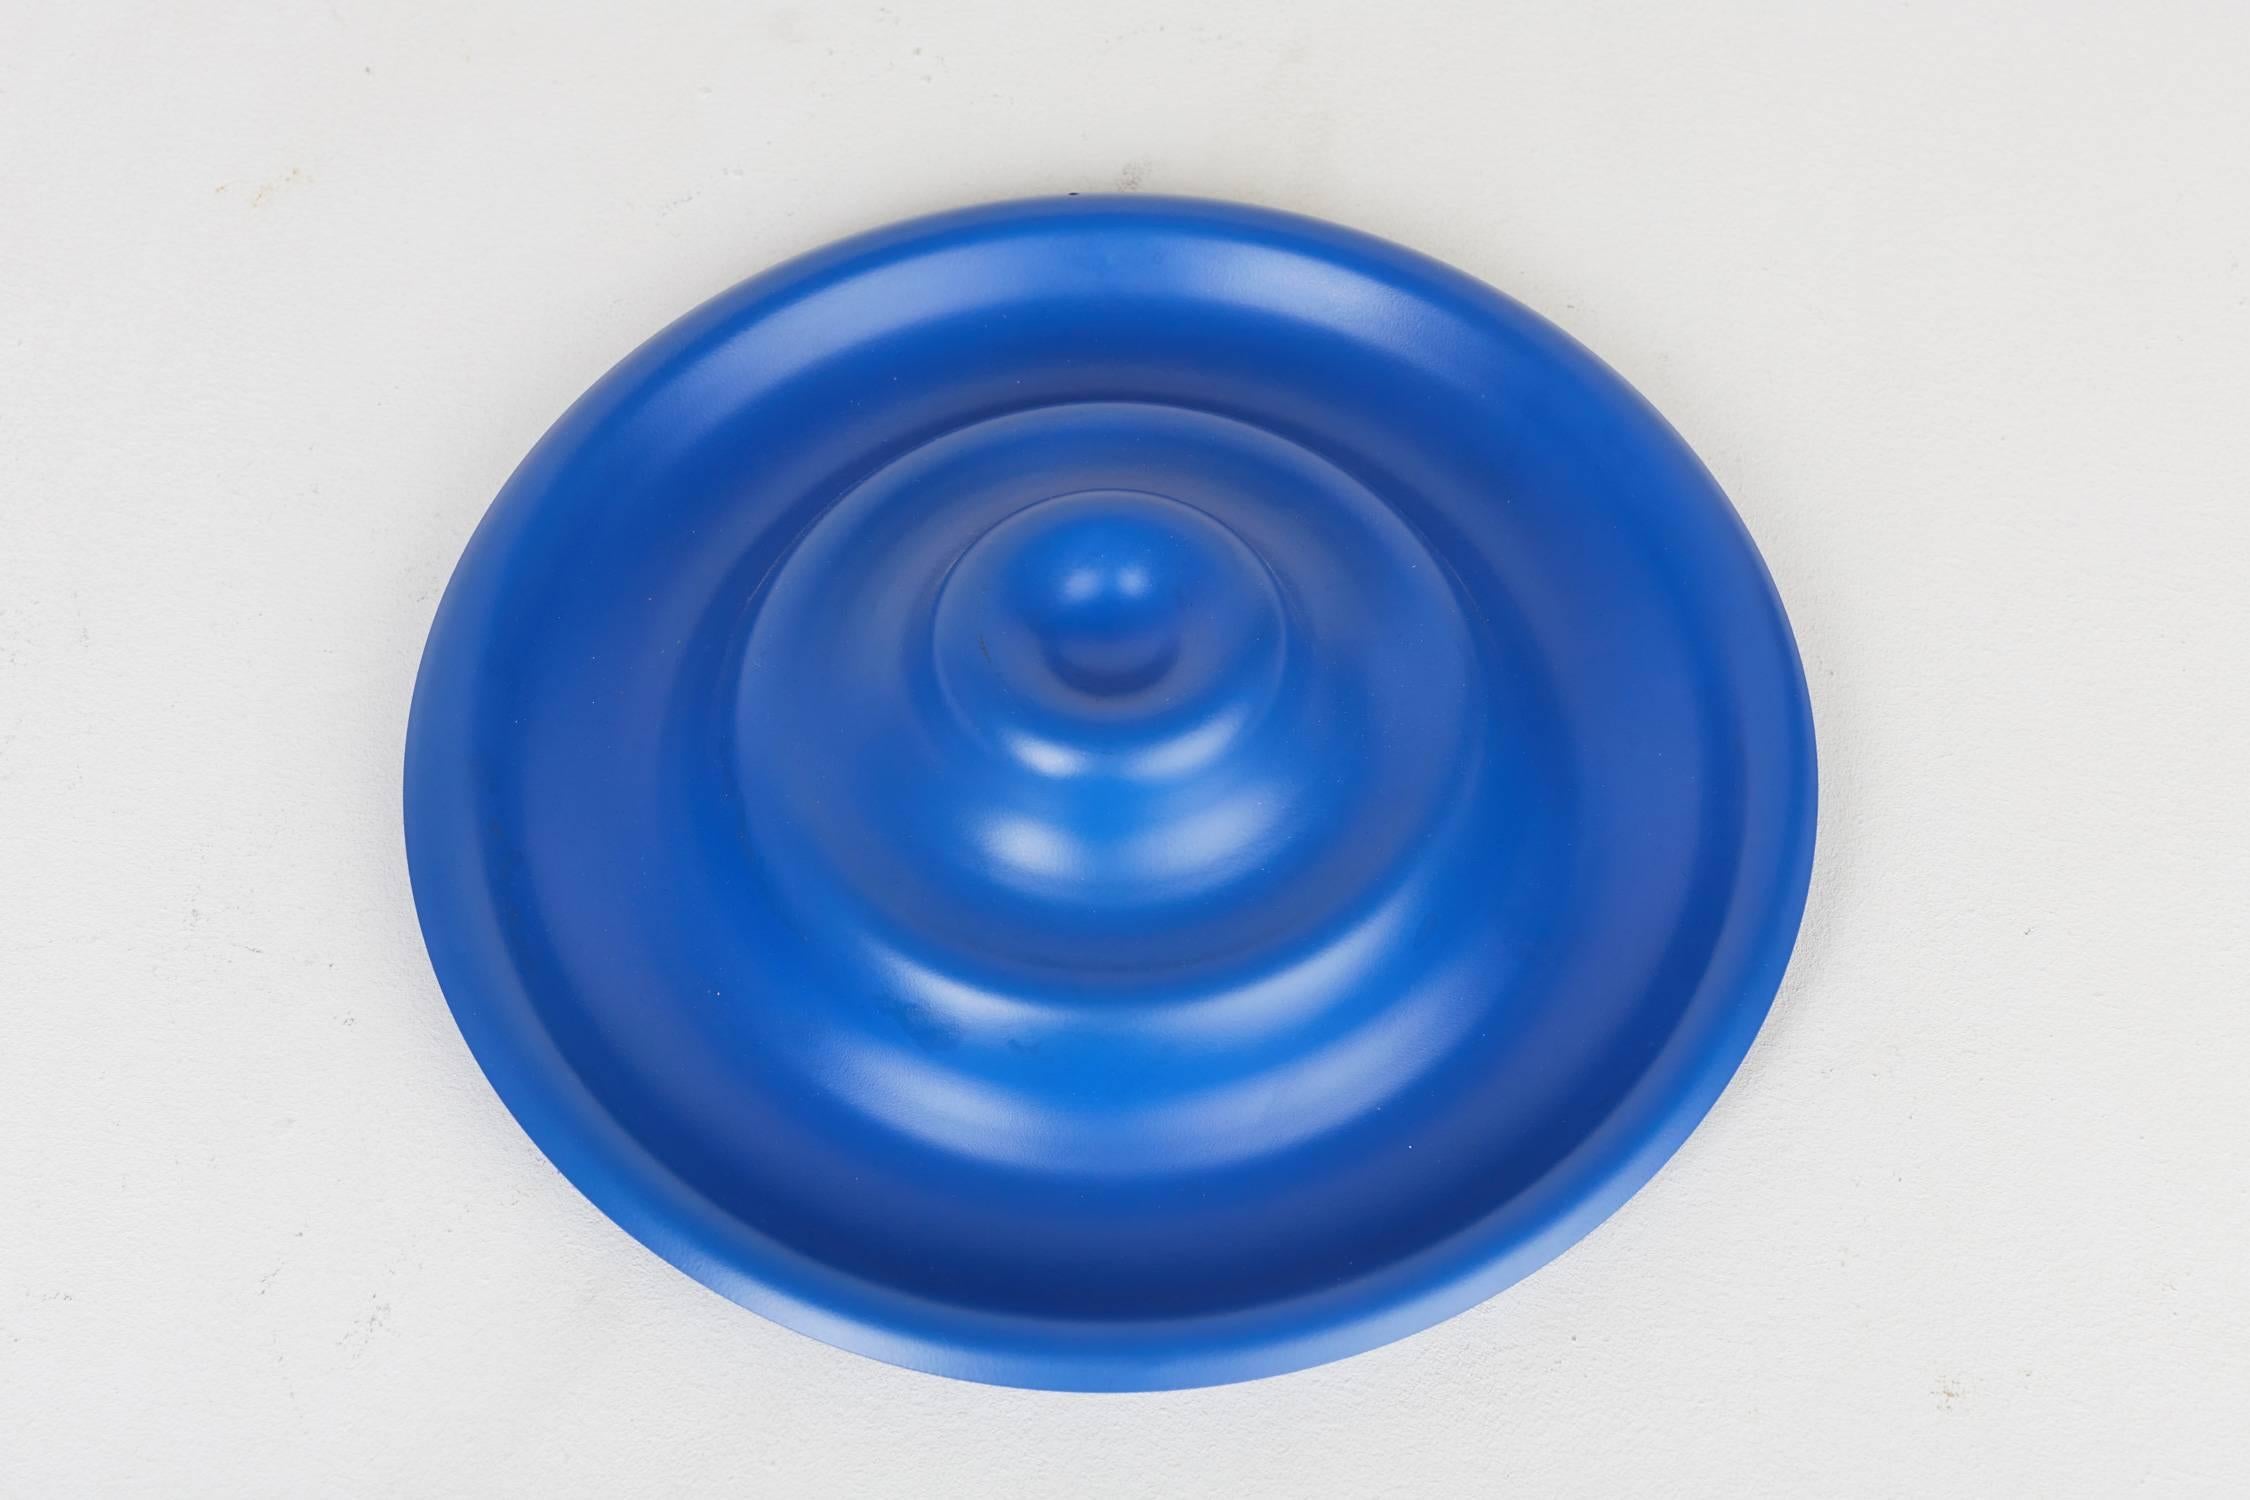 Fruit bowl 'Ondula'.
Design by Achille Castiglioni (1996).
Manufactured by Alessi, Italy.
D 31.5 cm, H 6 cm.
Blue lacquered steel.
Out of production.